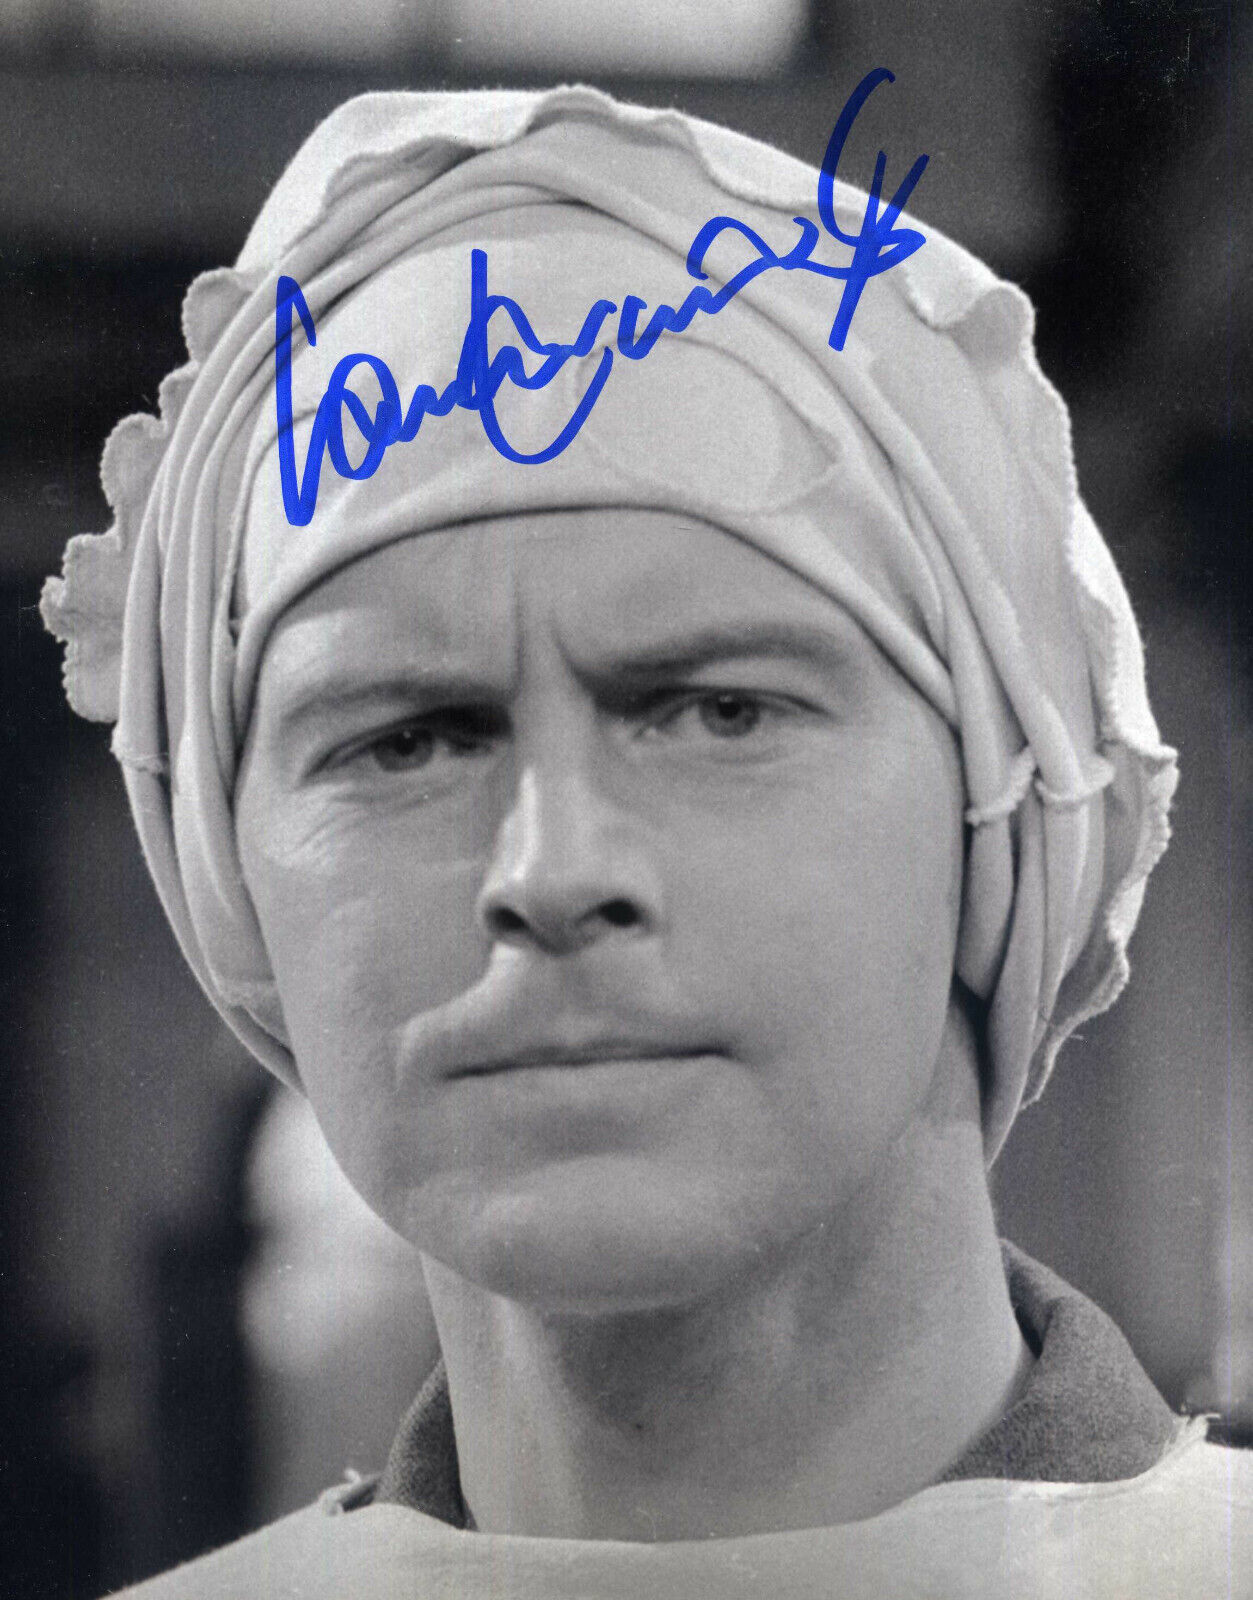 IAN LAVENDER Signed Photo Poster paintinggraph - TV & Film Actor PIKE in DAD'S ARMY - preprint